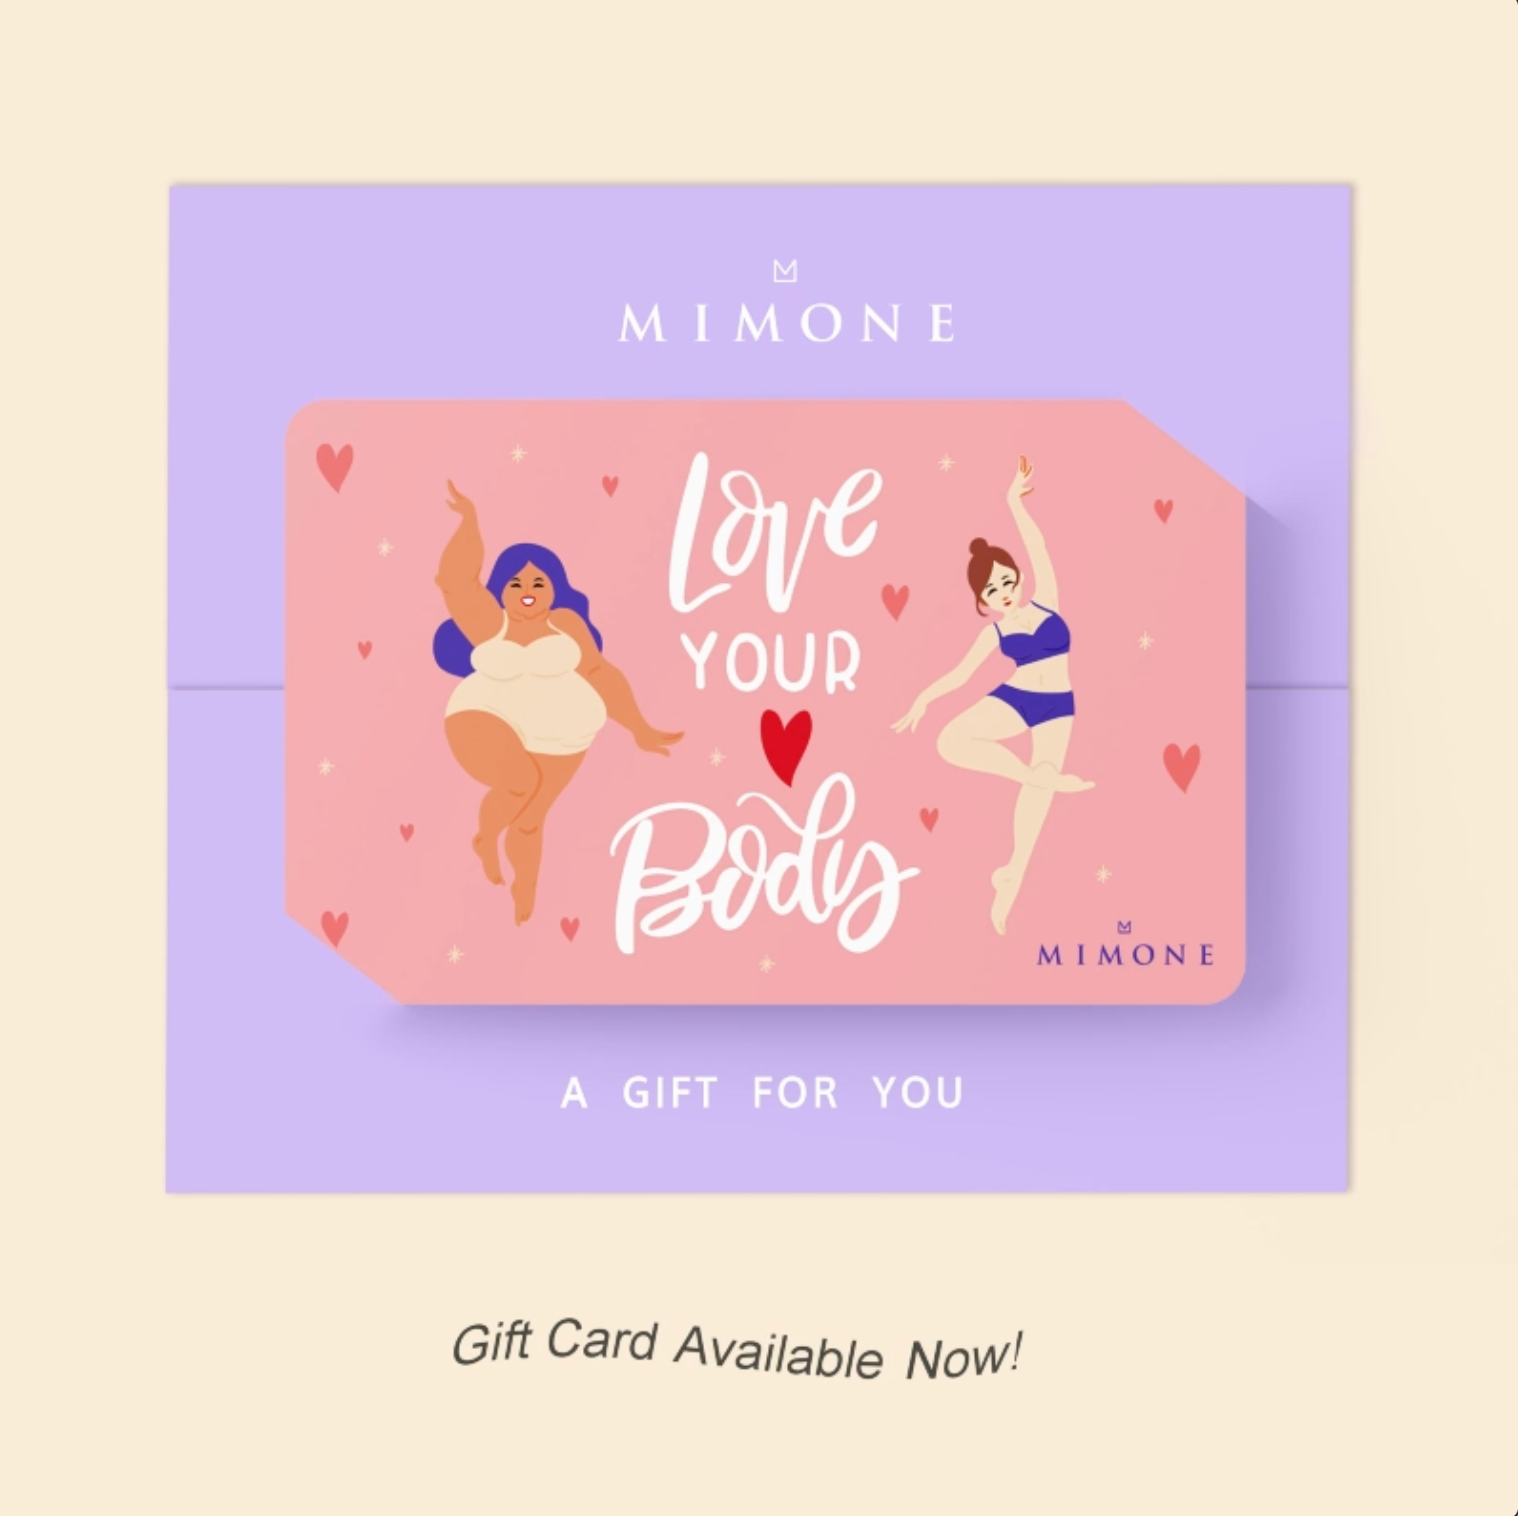 Physical Gift Card (In Store Use) Design C: Care & Love Your Body